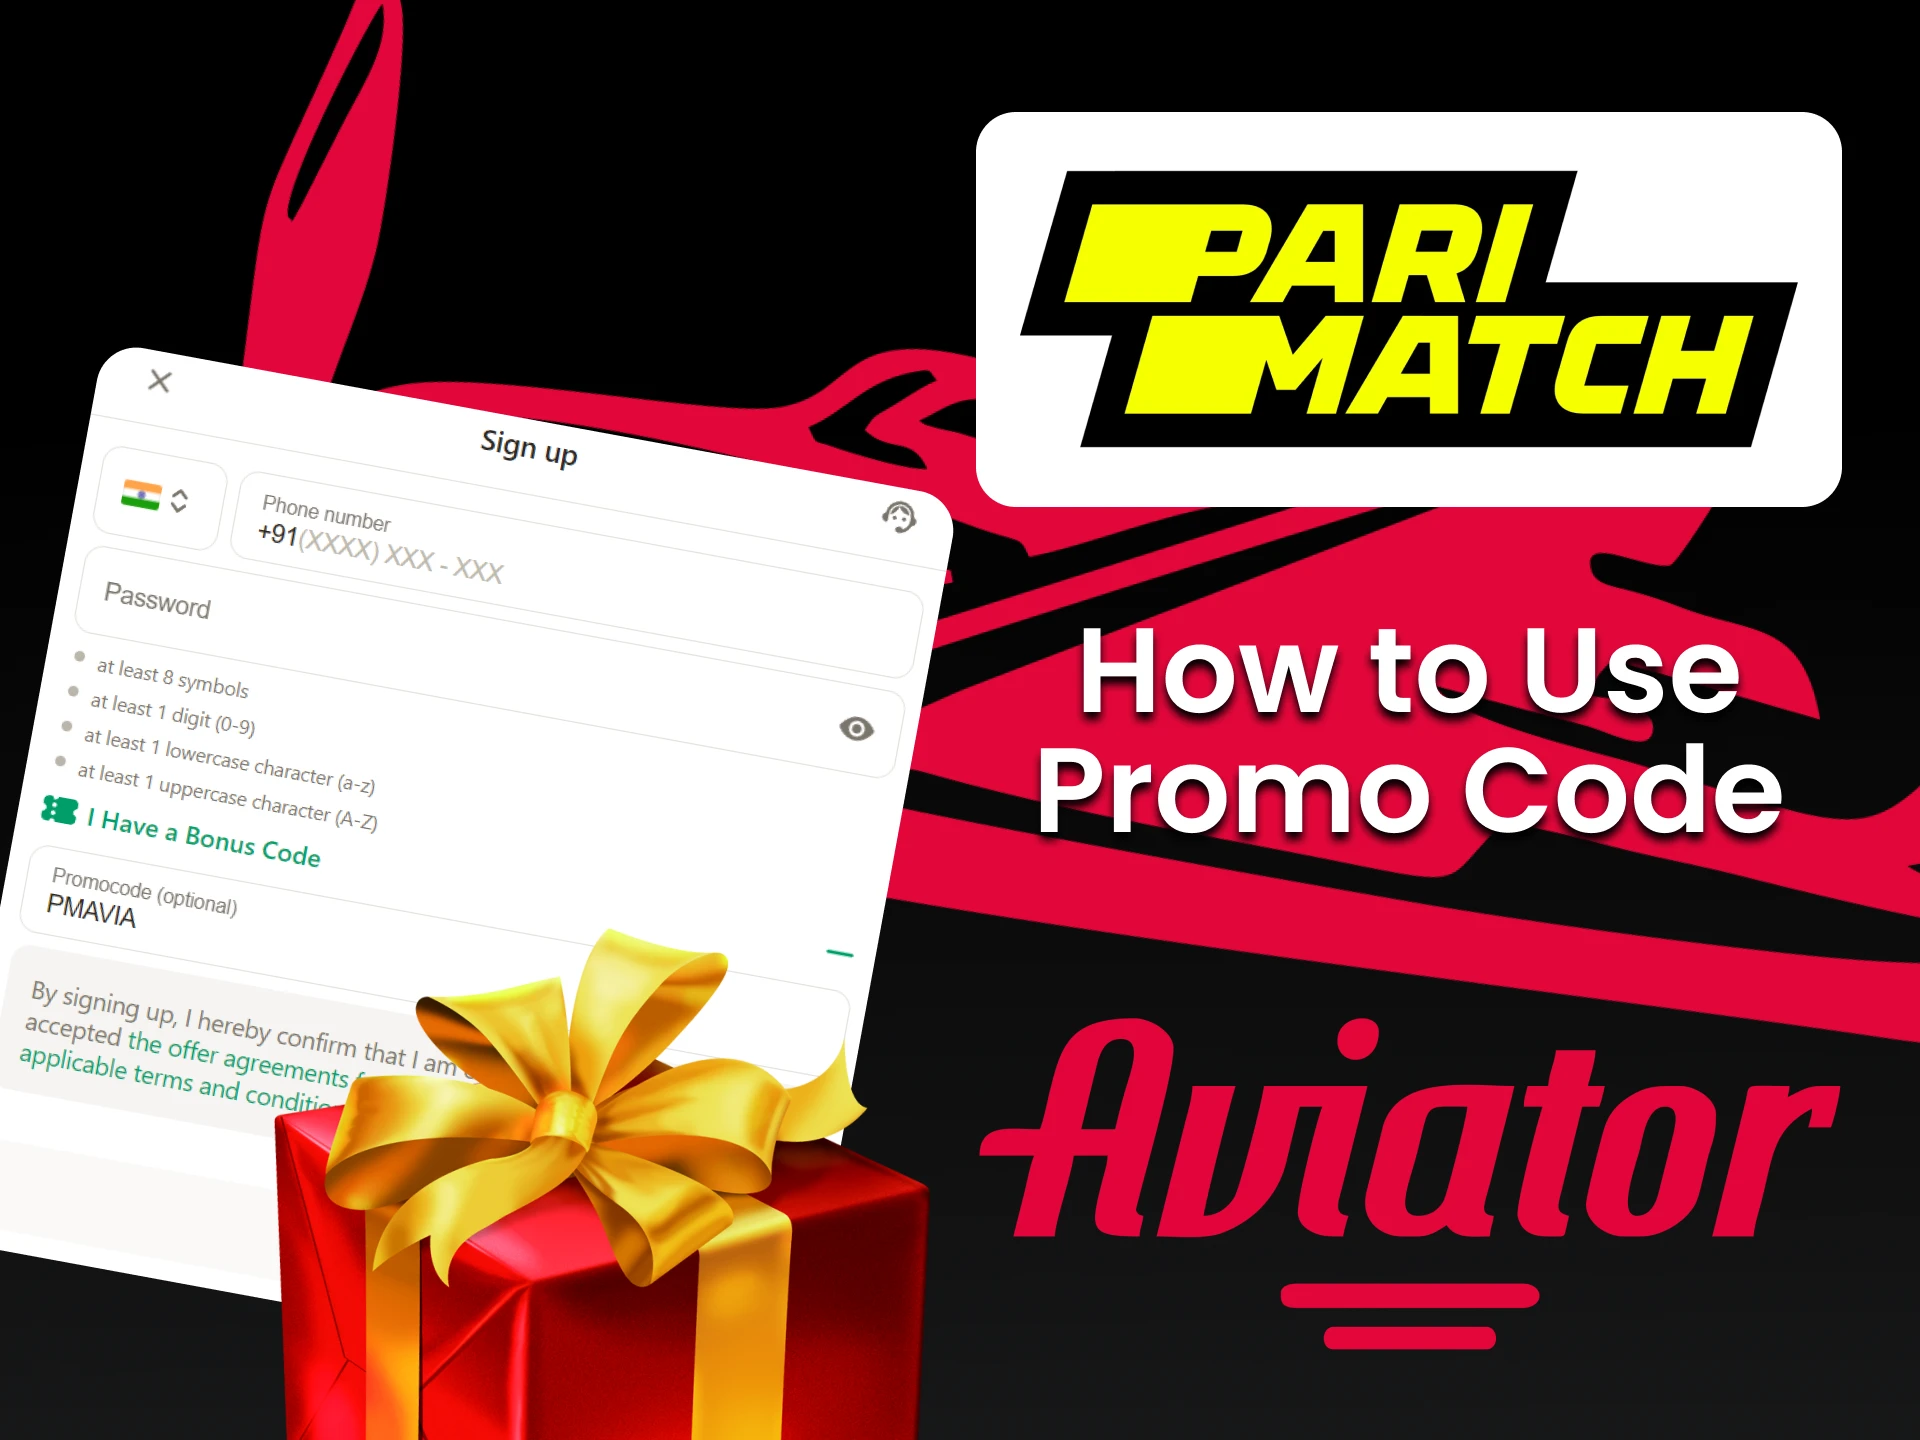 Learn how to apply and use a promo code for Aviator from Parimatch.